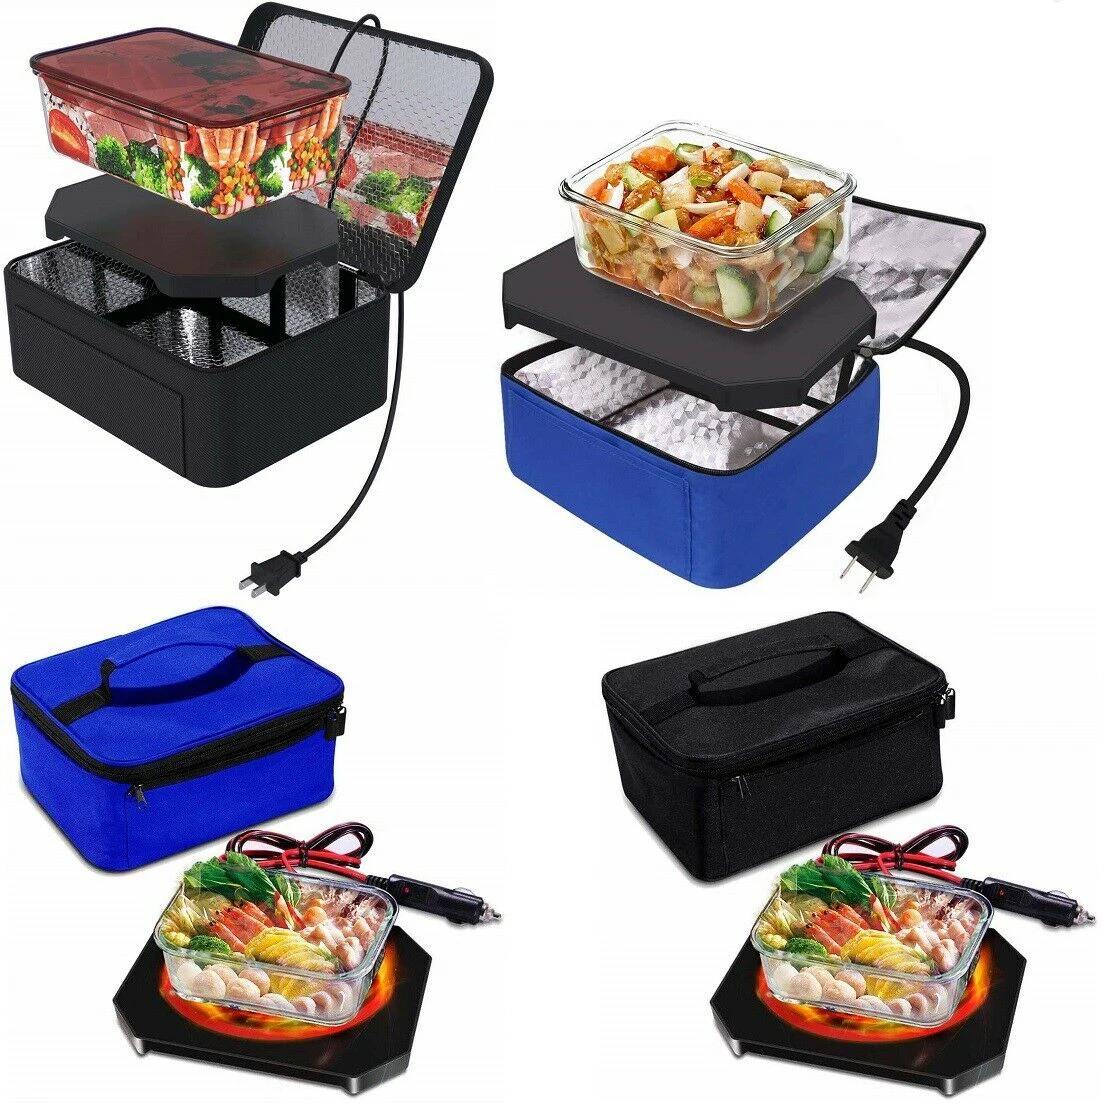 Portable Food Warmers Electric Heater Lunch Box Mini Oven 12V Car 110V Office 